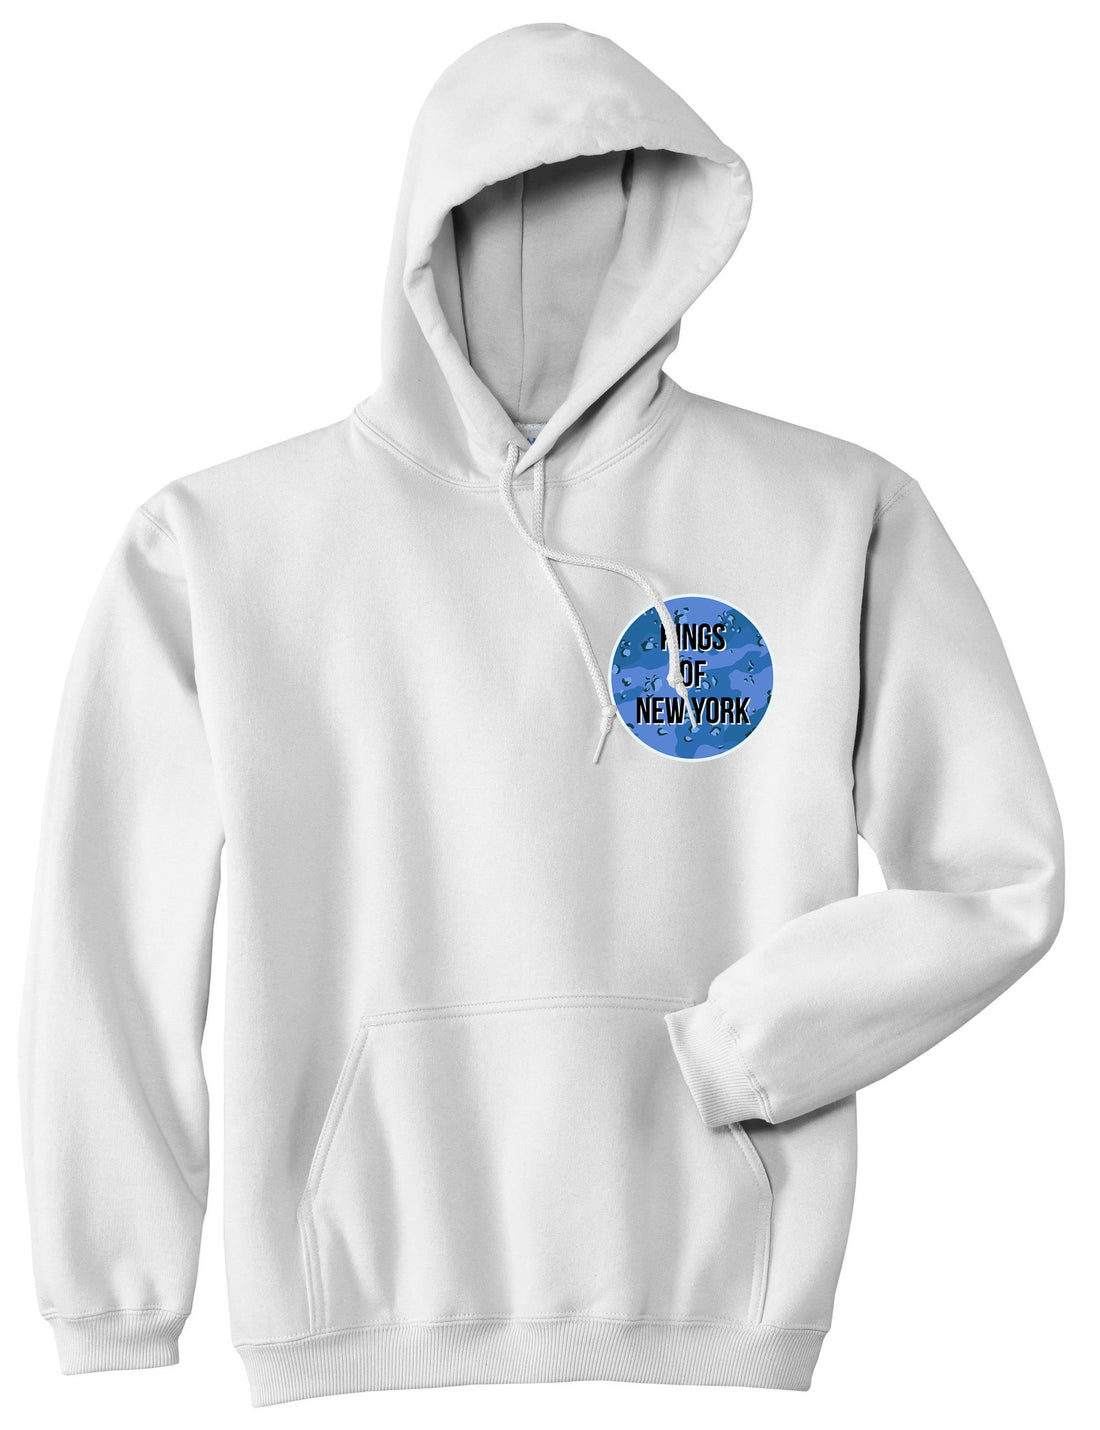  Army Chest Logo Armed Force Pullover Hoodie Hoody in White by Kings Of NY